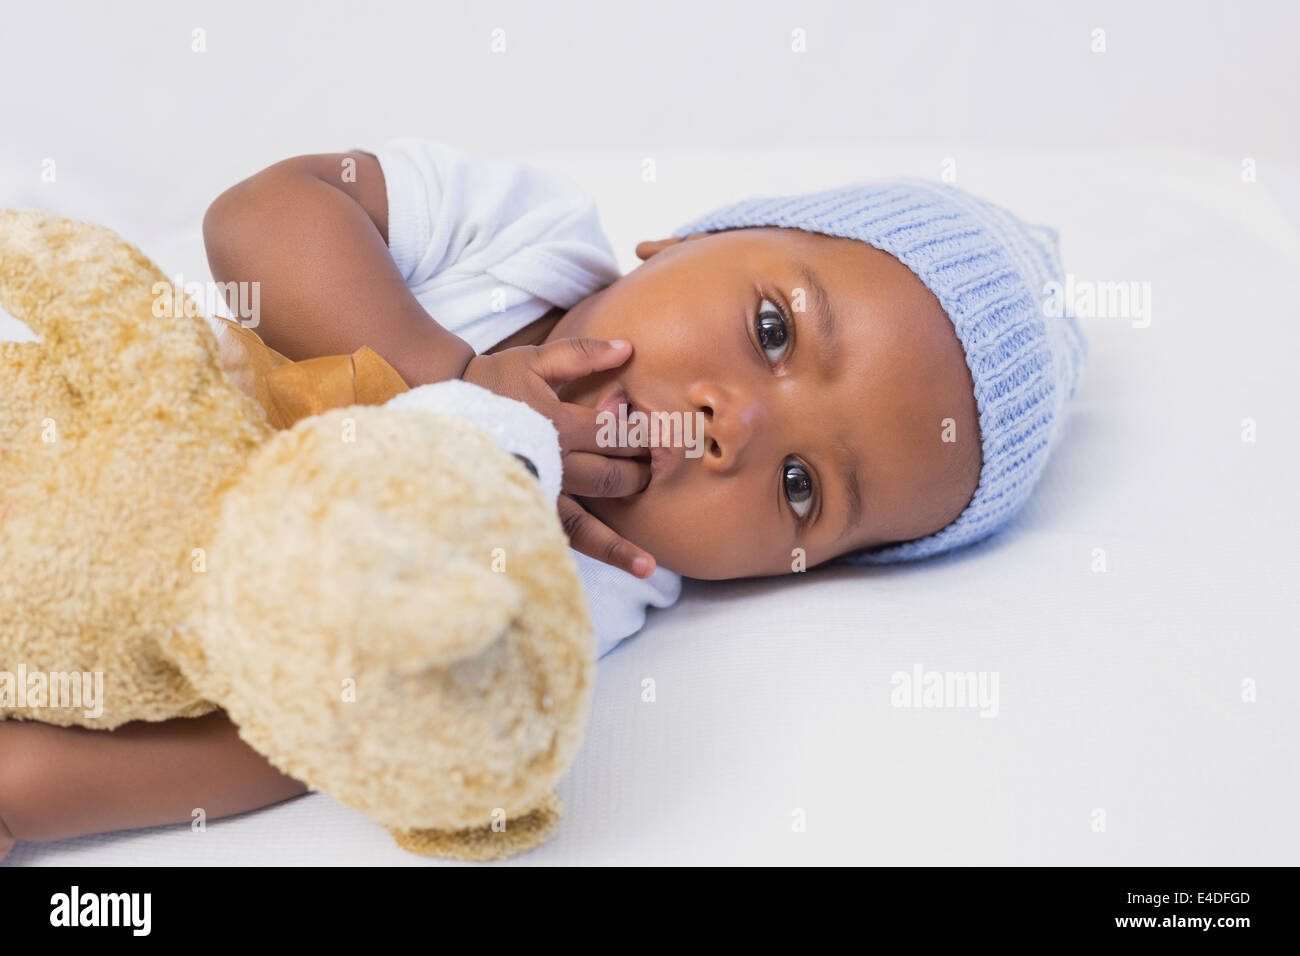 Adorable baby boy with teddy Stock Photo